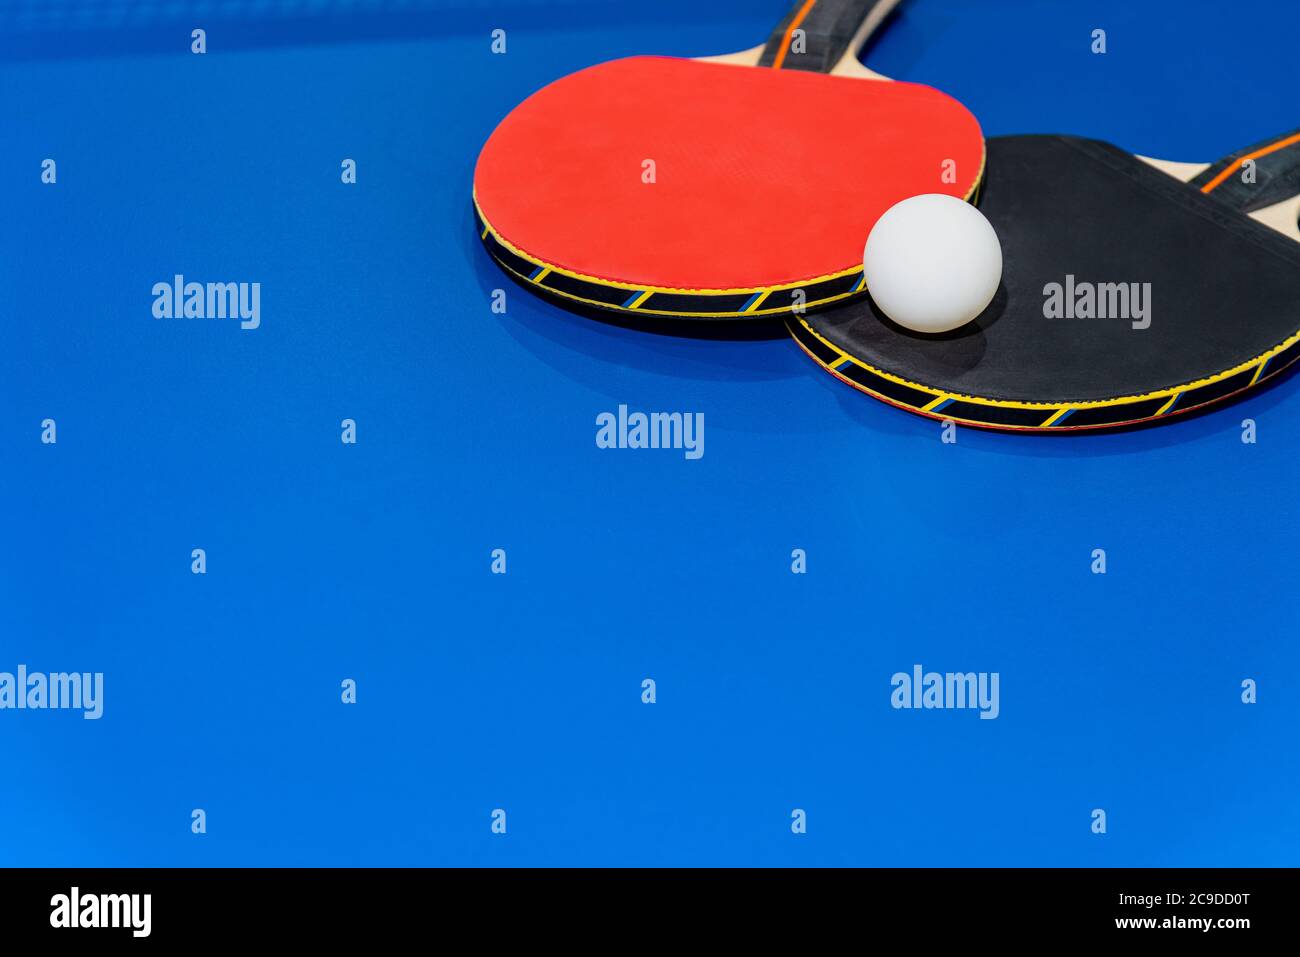 Black and red table tennis racket and a white ping pong ball on the blue ping pong table, Two table tennis paddle is a sports competition equipment fo Stock Photo